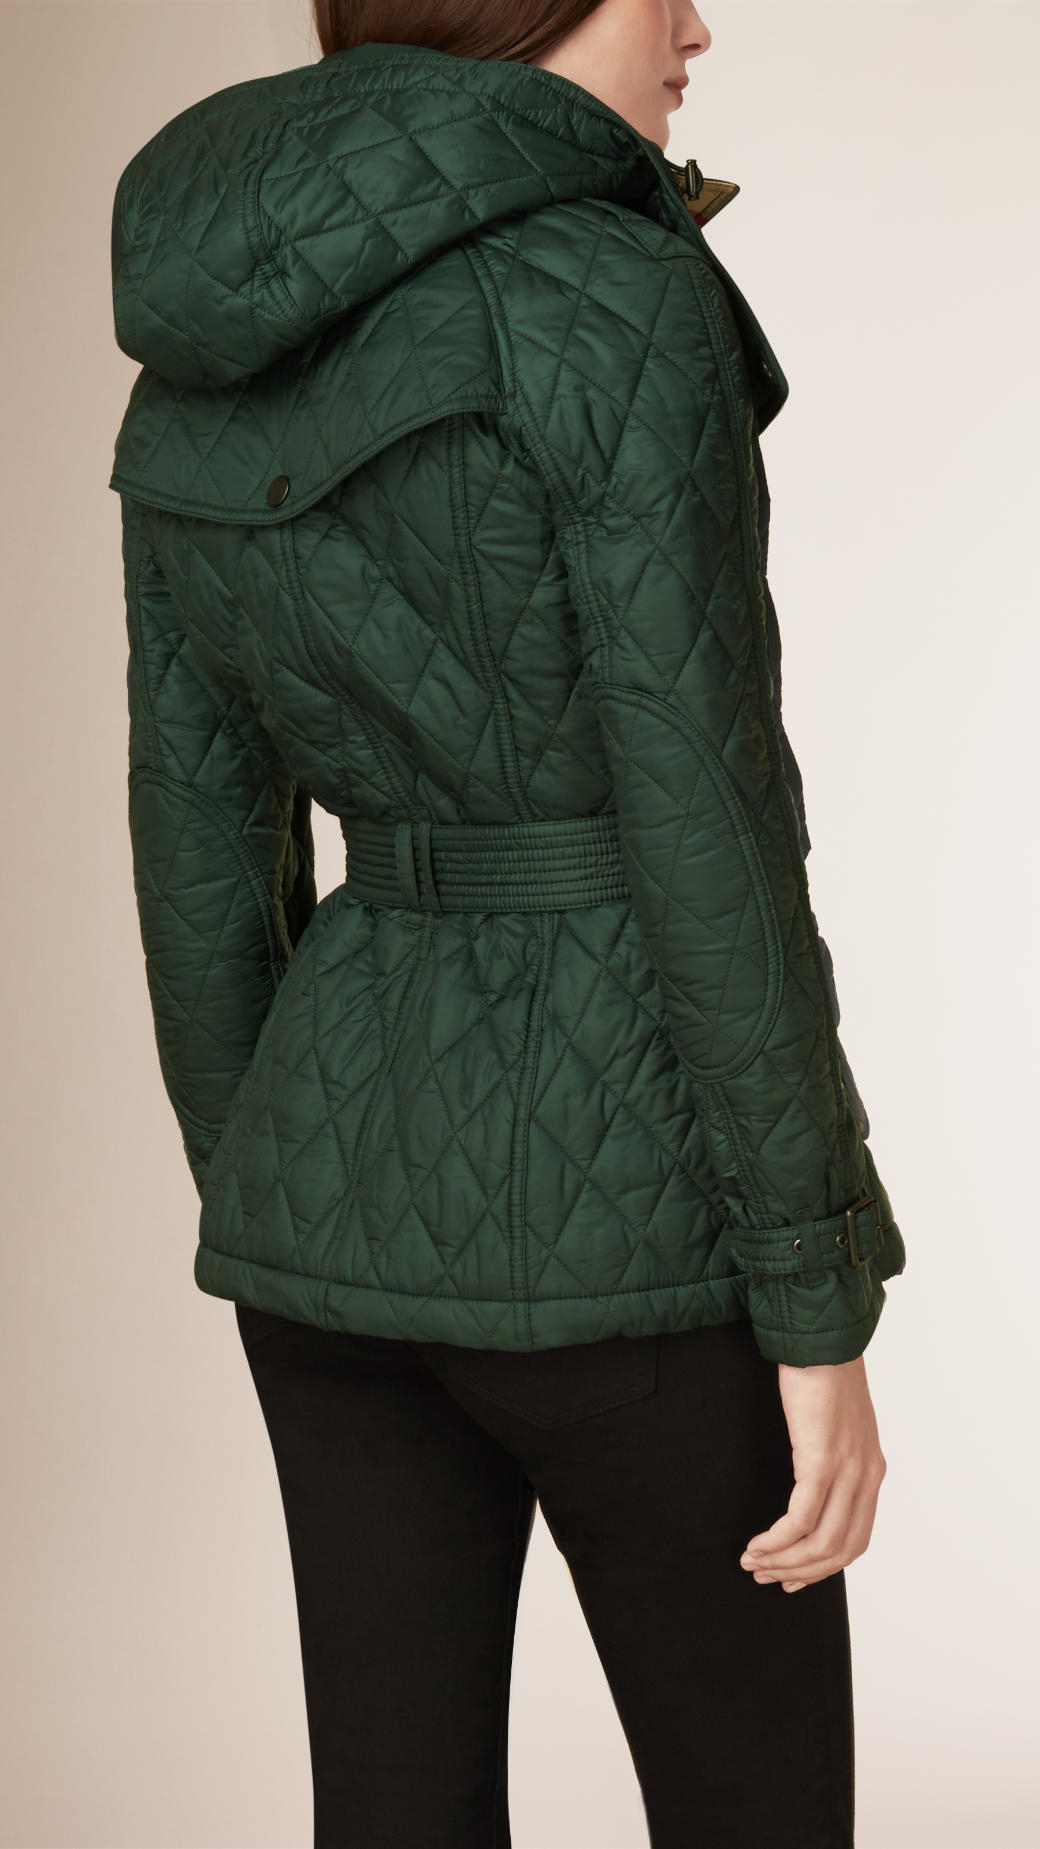 Burberry Diamond Quilted Jacket in Green - Lyst